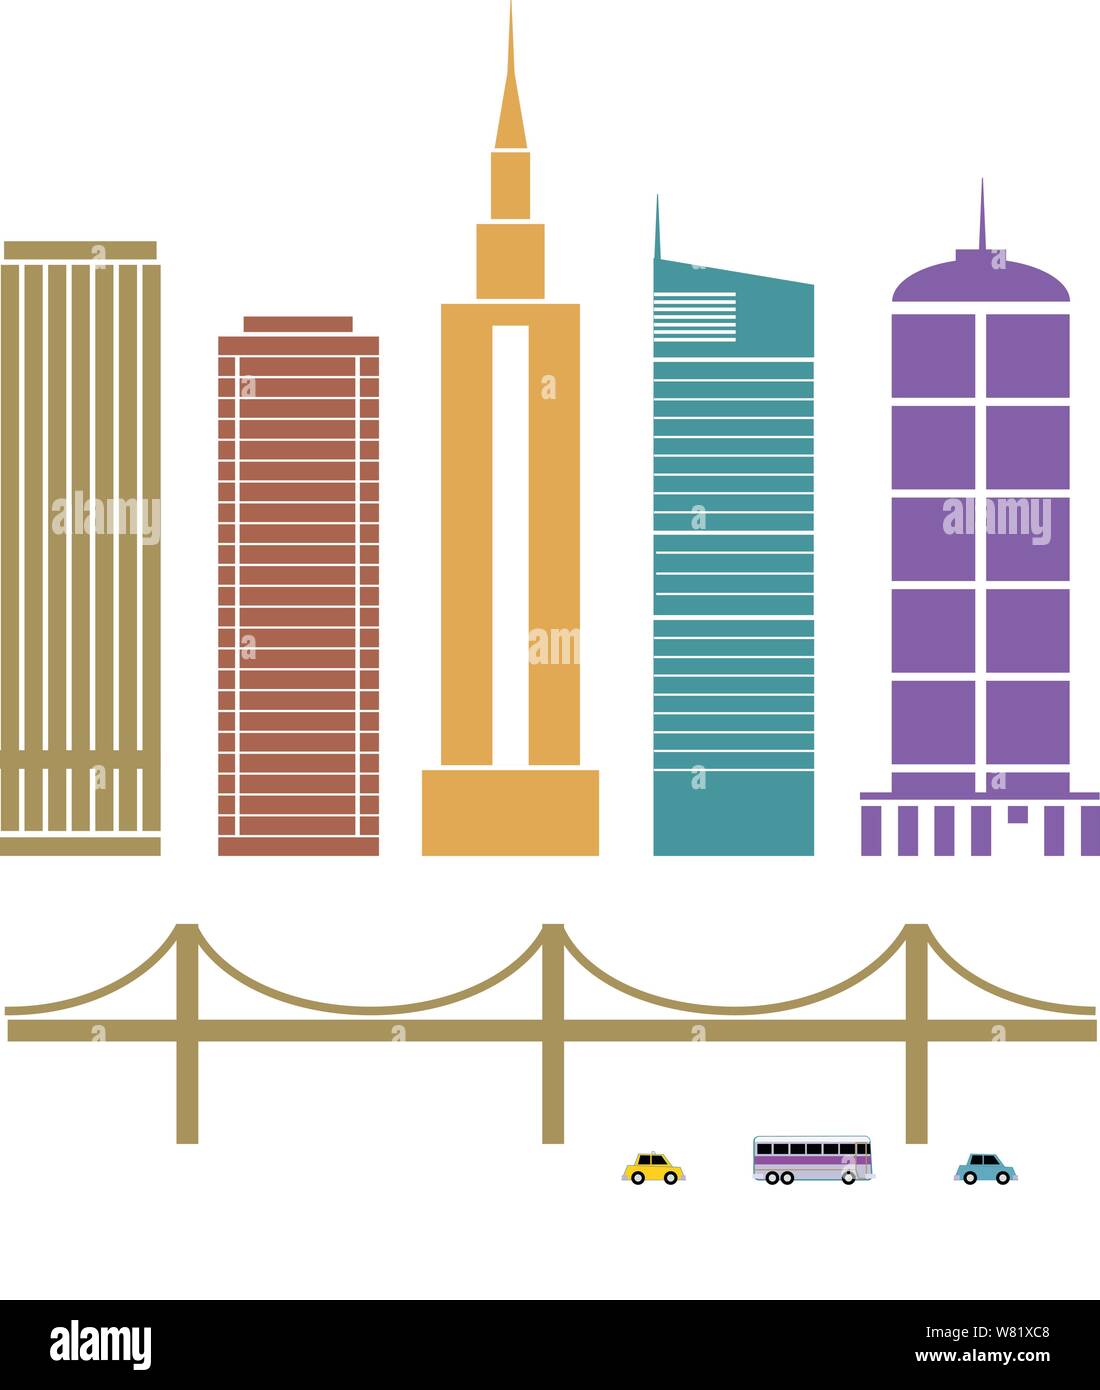 Five generic buildings, a suspension bridge, a taxi, bus and car represented as simple graphics. Stock Vector